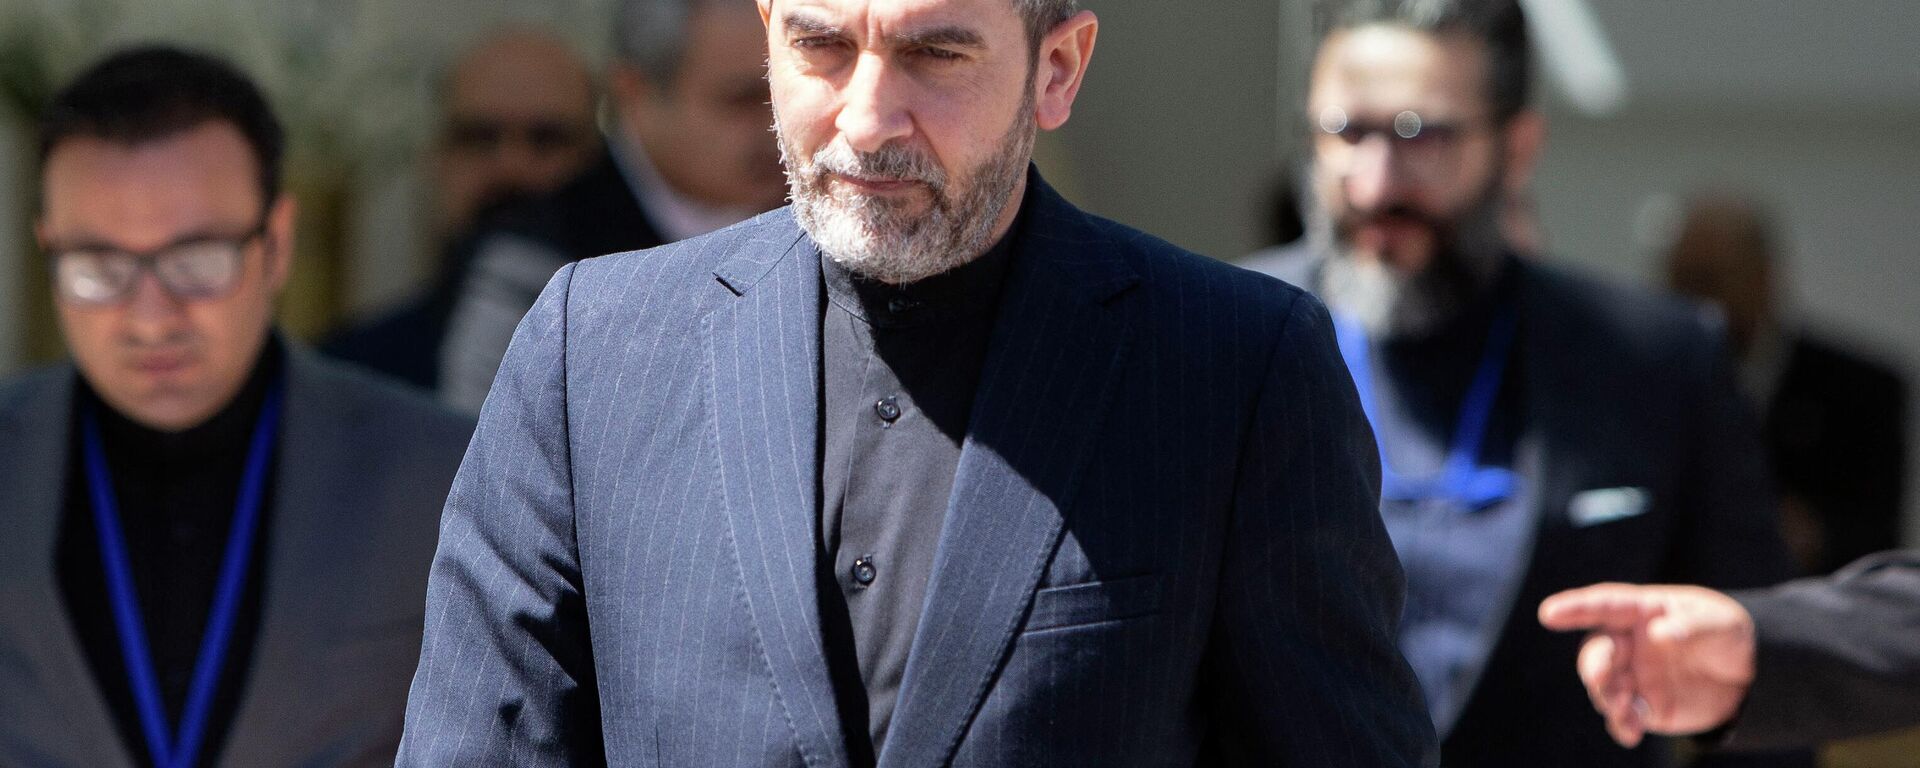 Iran's chief nuclear negotiator Ali Bagheri Kani leaves after talks at the Coburg Palais, the venue of the Joint Comprehensive Plan of Action (JCPOA) in Vienna on August 4, 2022. - Sputnik International, 1920, 23.08.2022